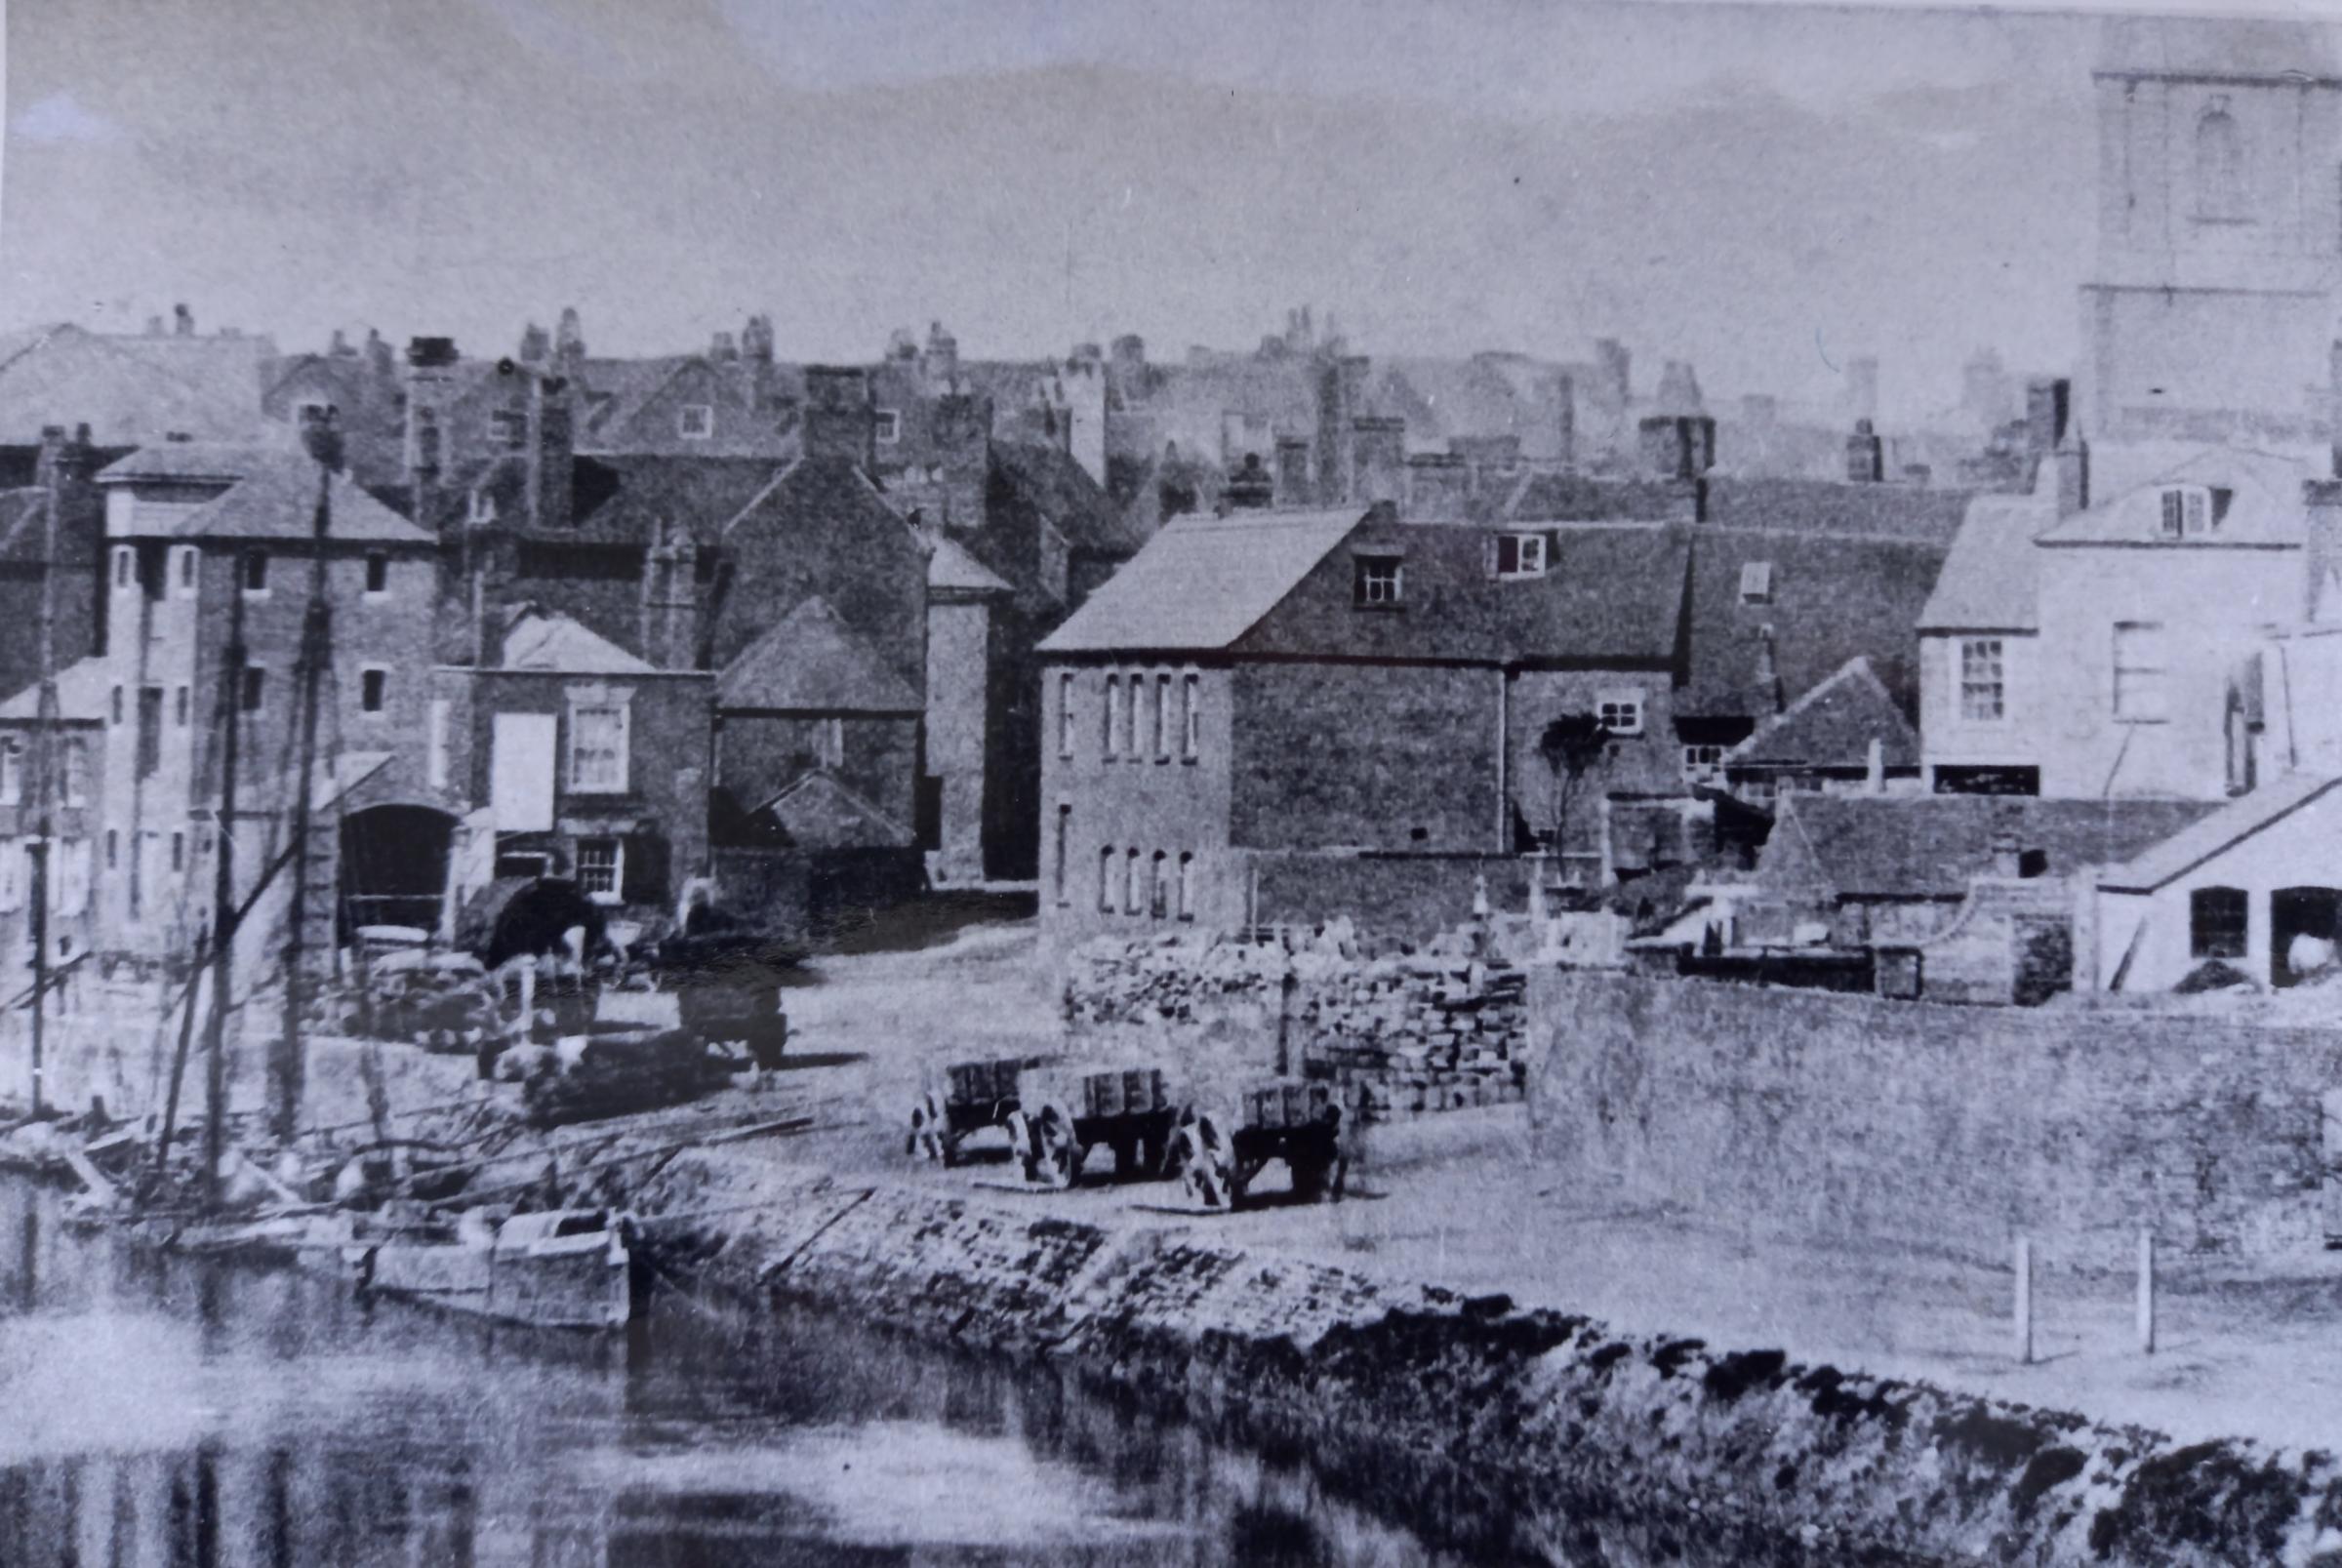 South Quay, Worcester in 1926 before the warren of narrow riverside streets were demolished